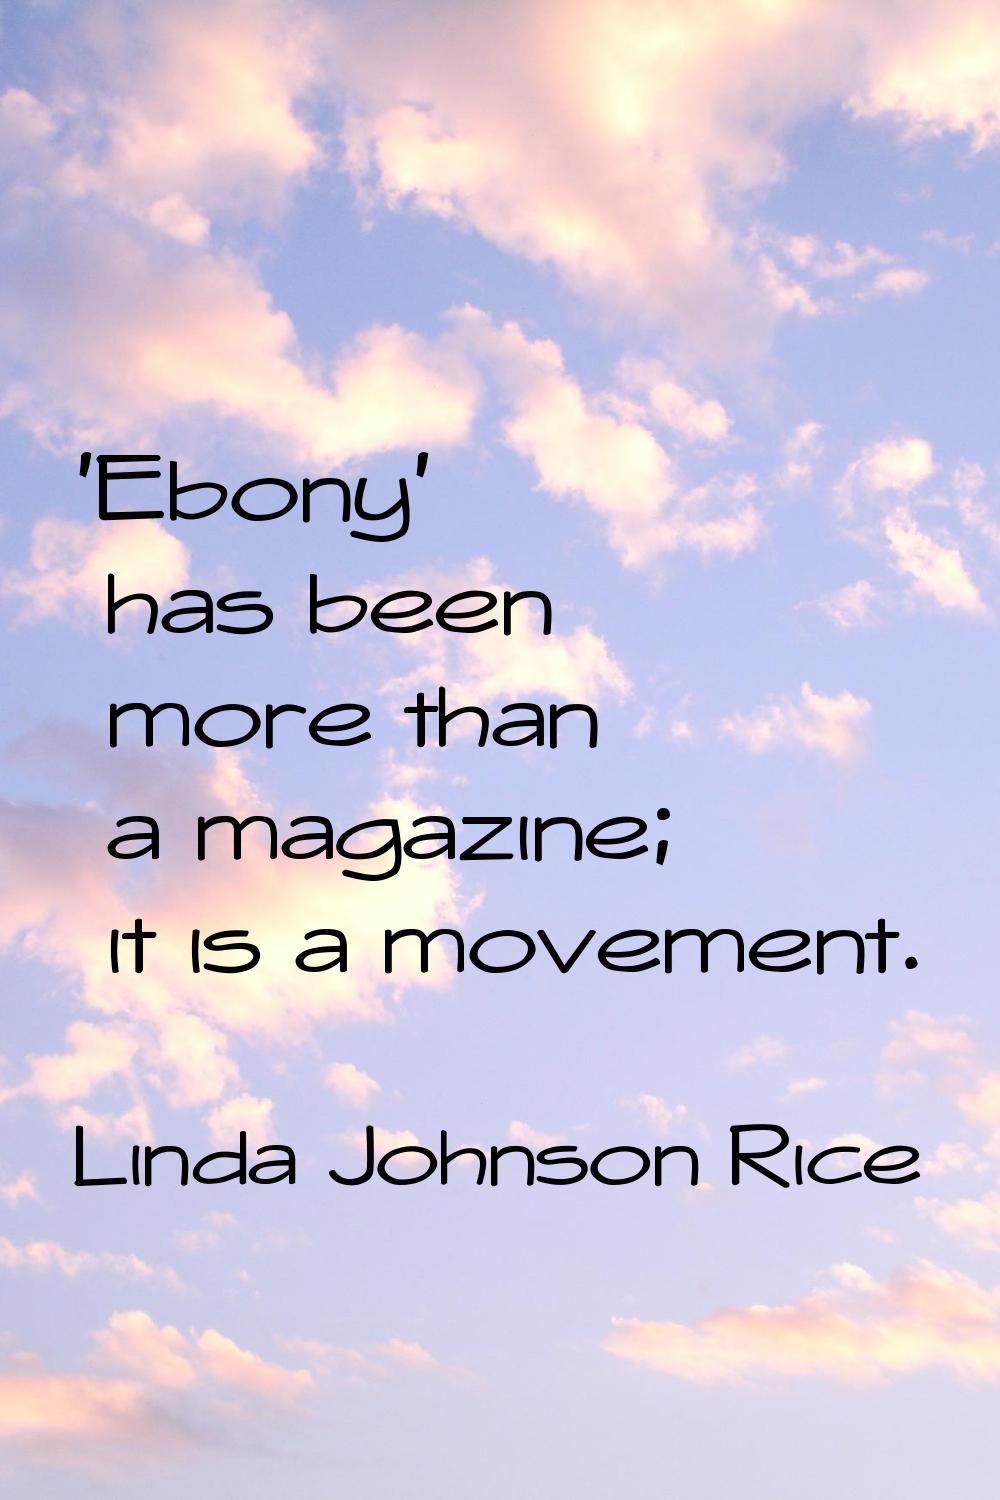 'Ebony' has been more than a magazine; it is a movement.